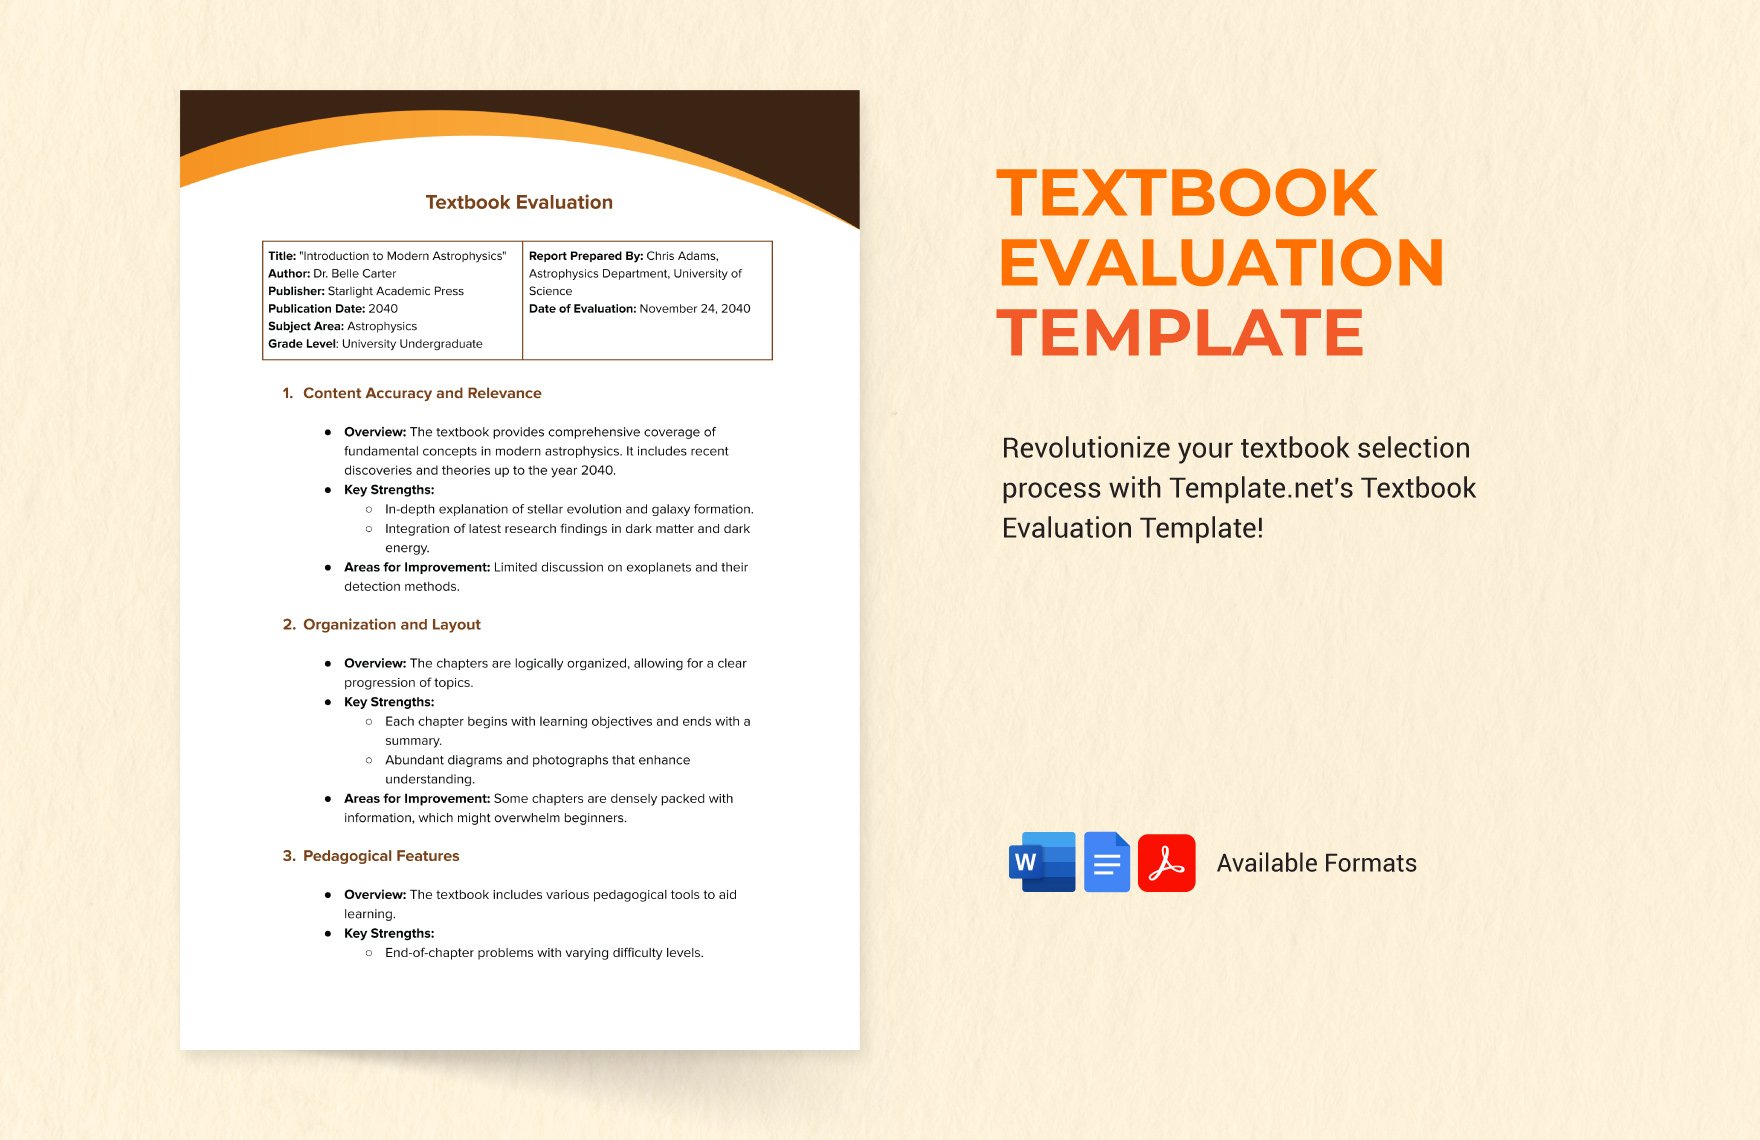 Textbook Evaluation Template